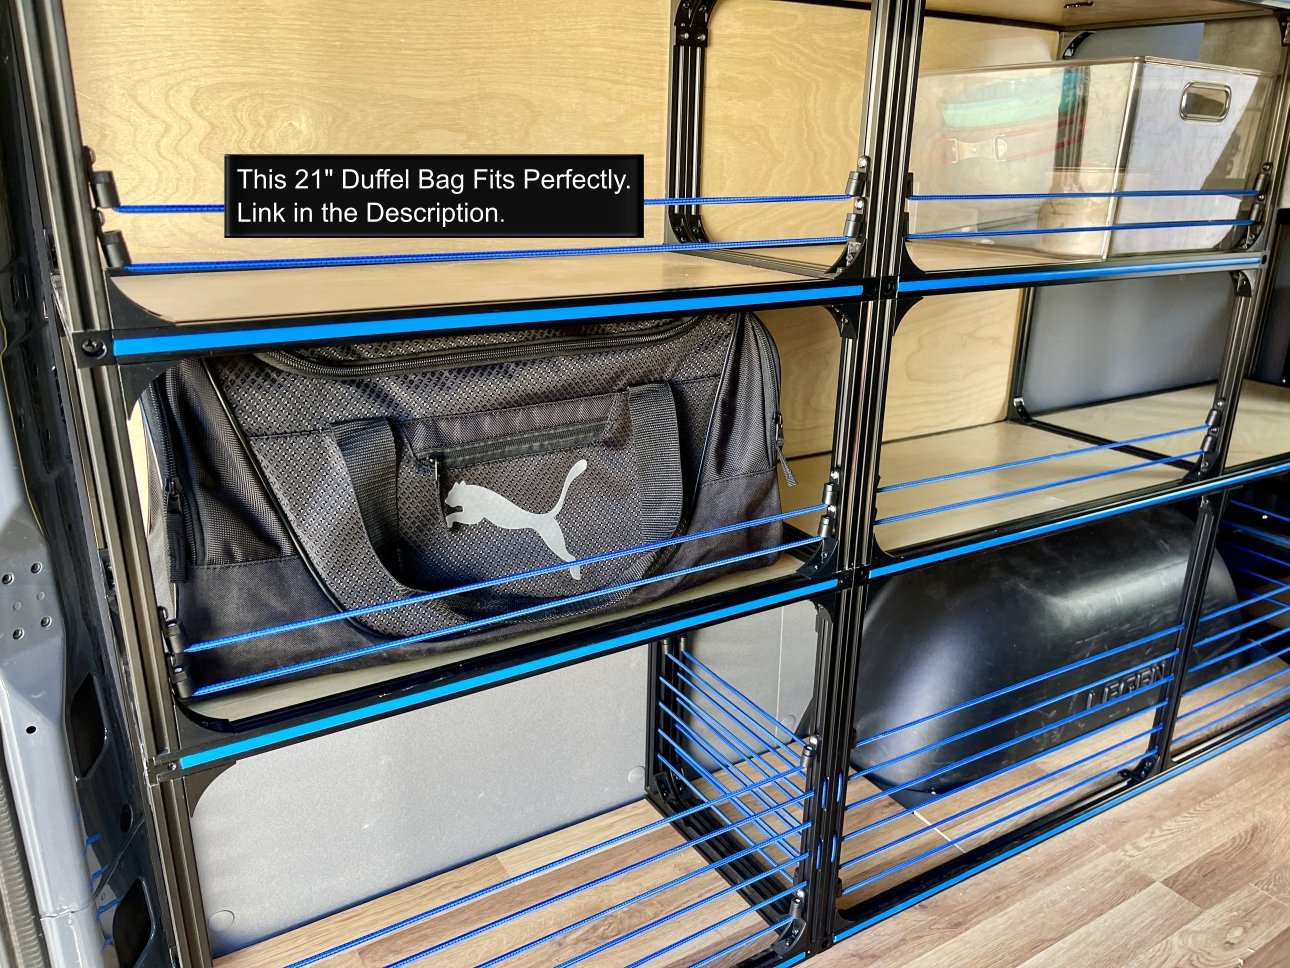 ram promaster 136 camper conversion diy kit shelving with duffel bag storage, front view